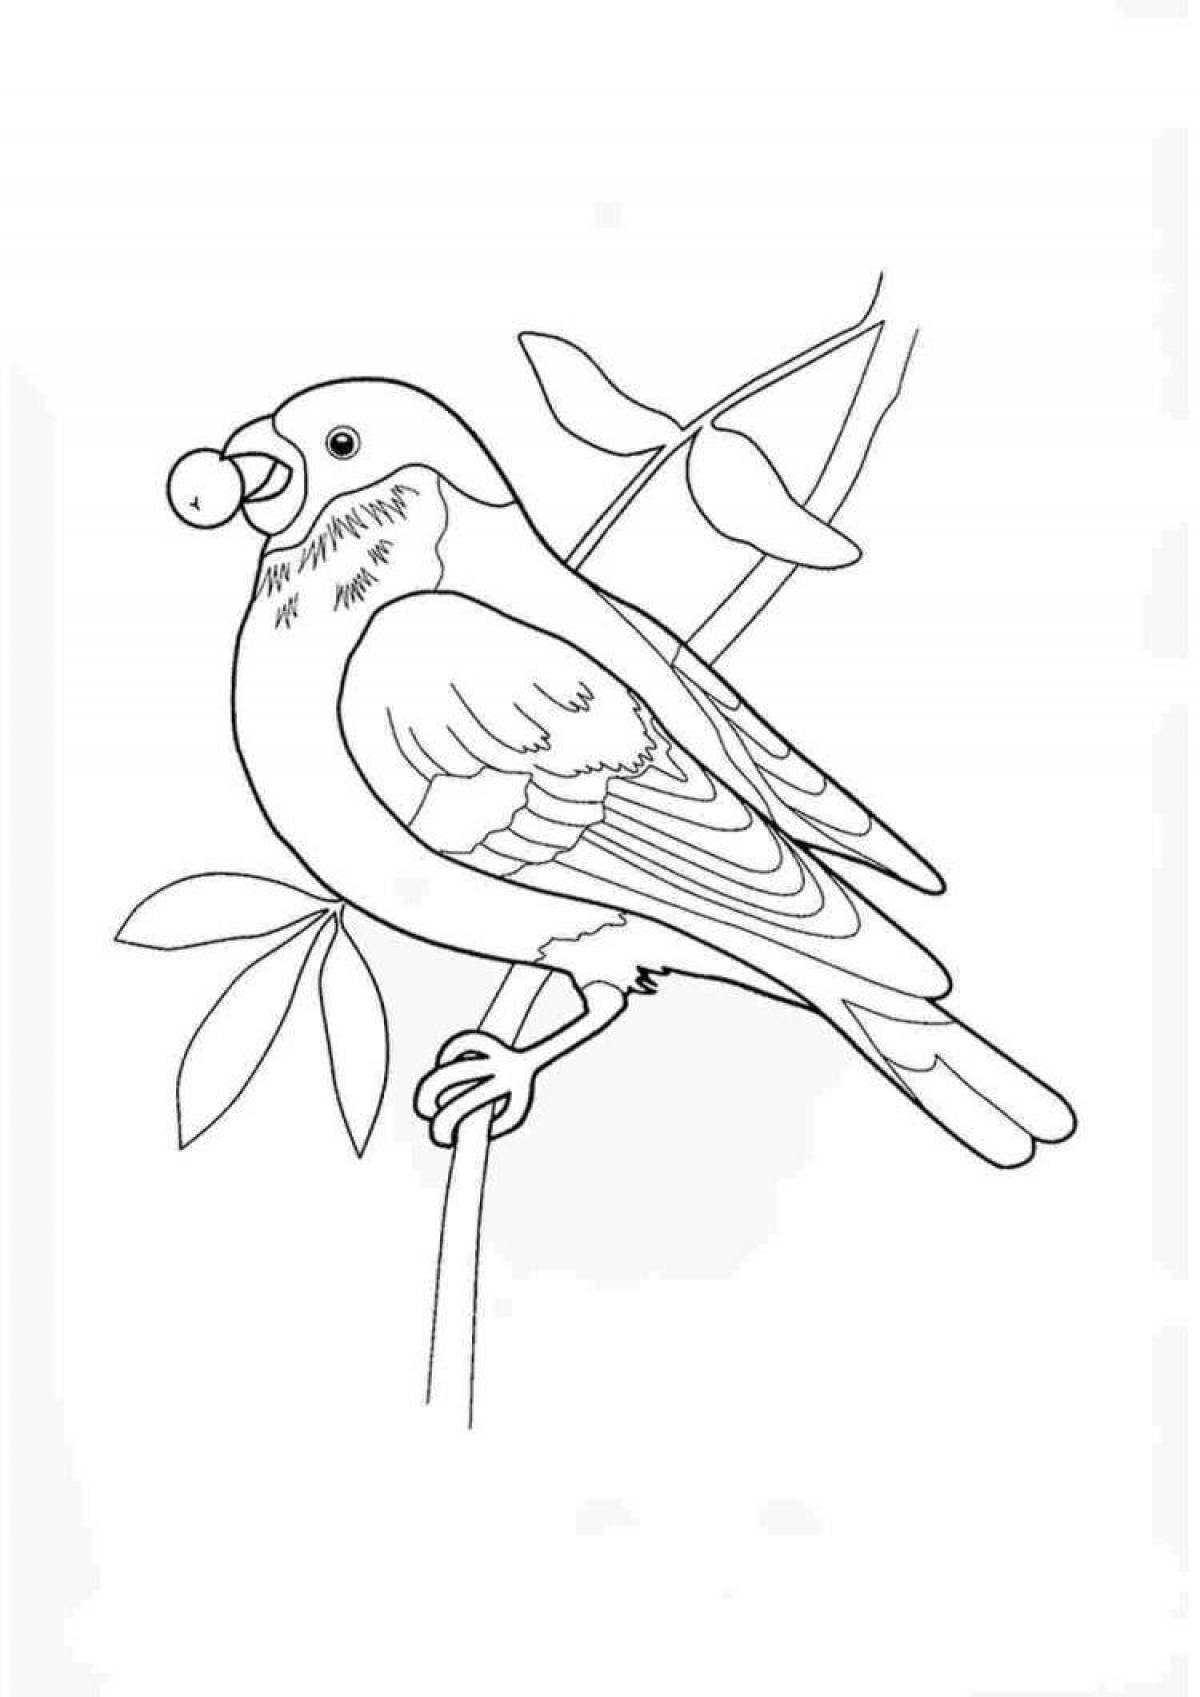 Charming bullfinch and tit coloring